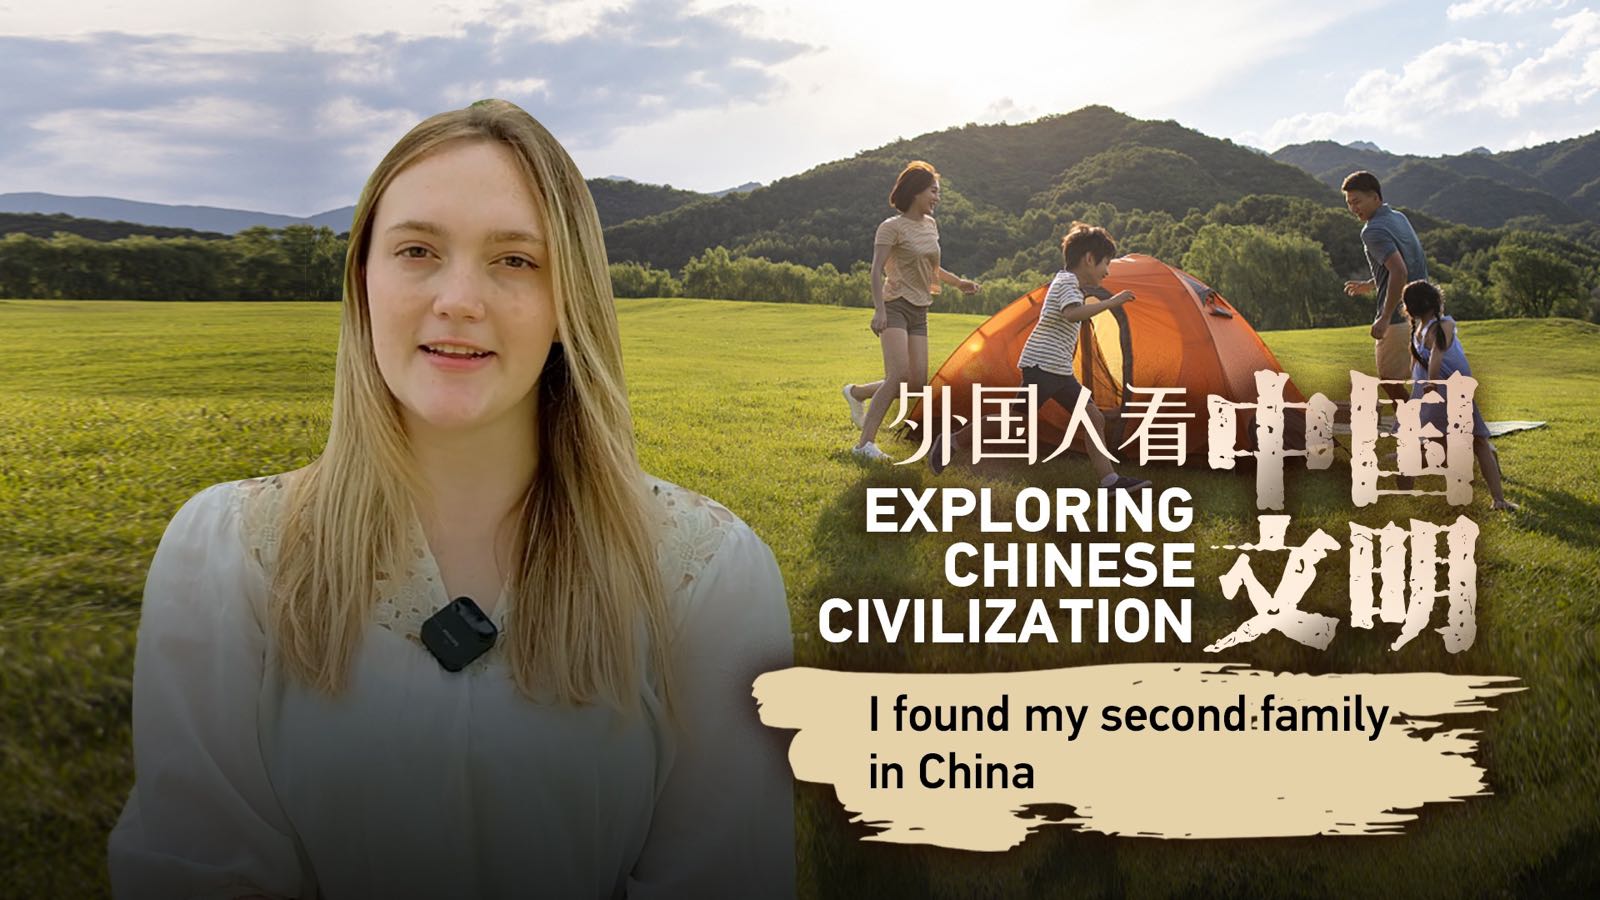 Exploring Chinese civilization: I found my second family in China